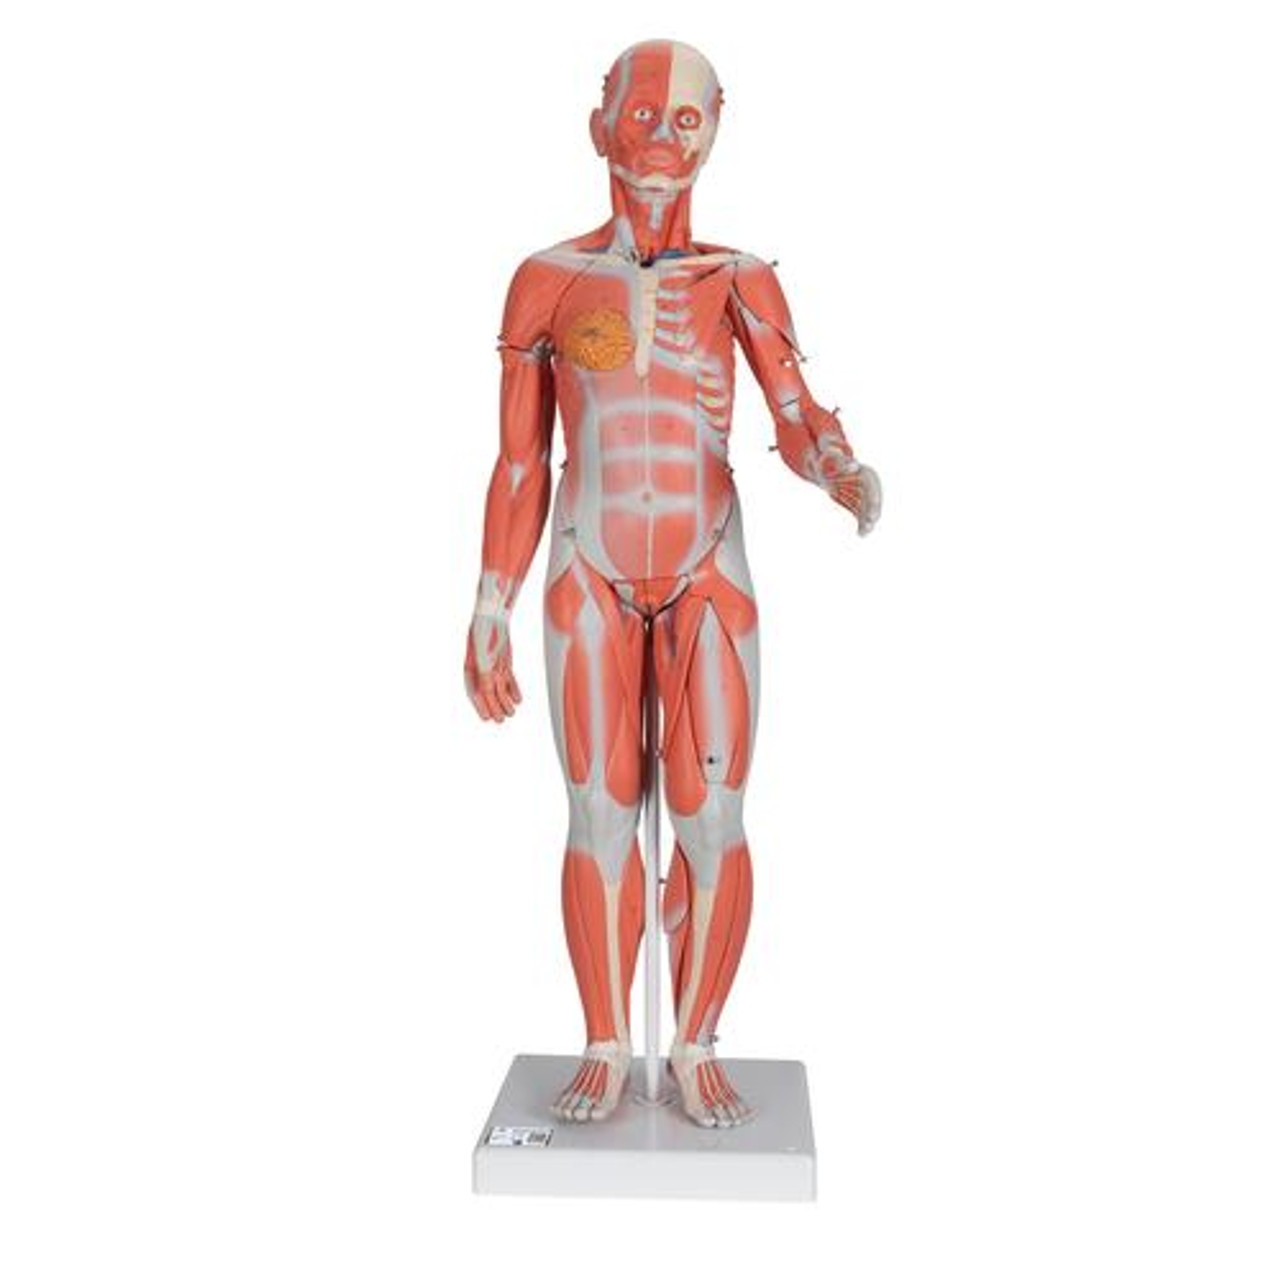 Female chest and abdomen muscles anatomy for medical concept 3d